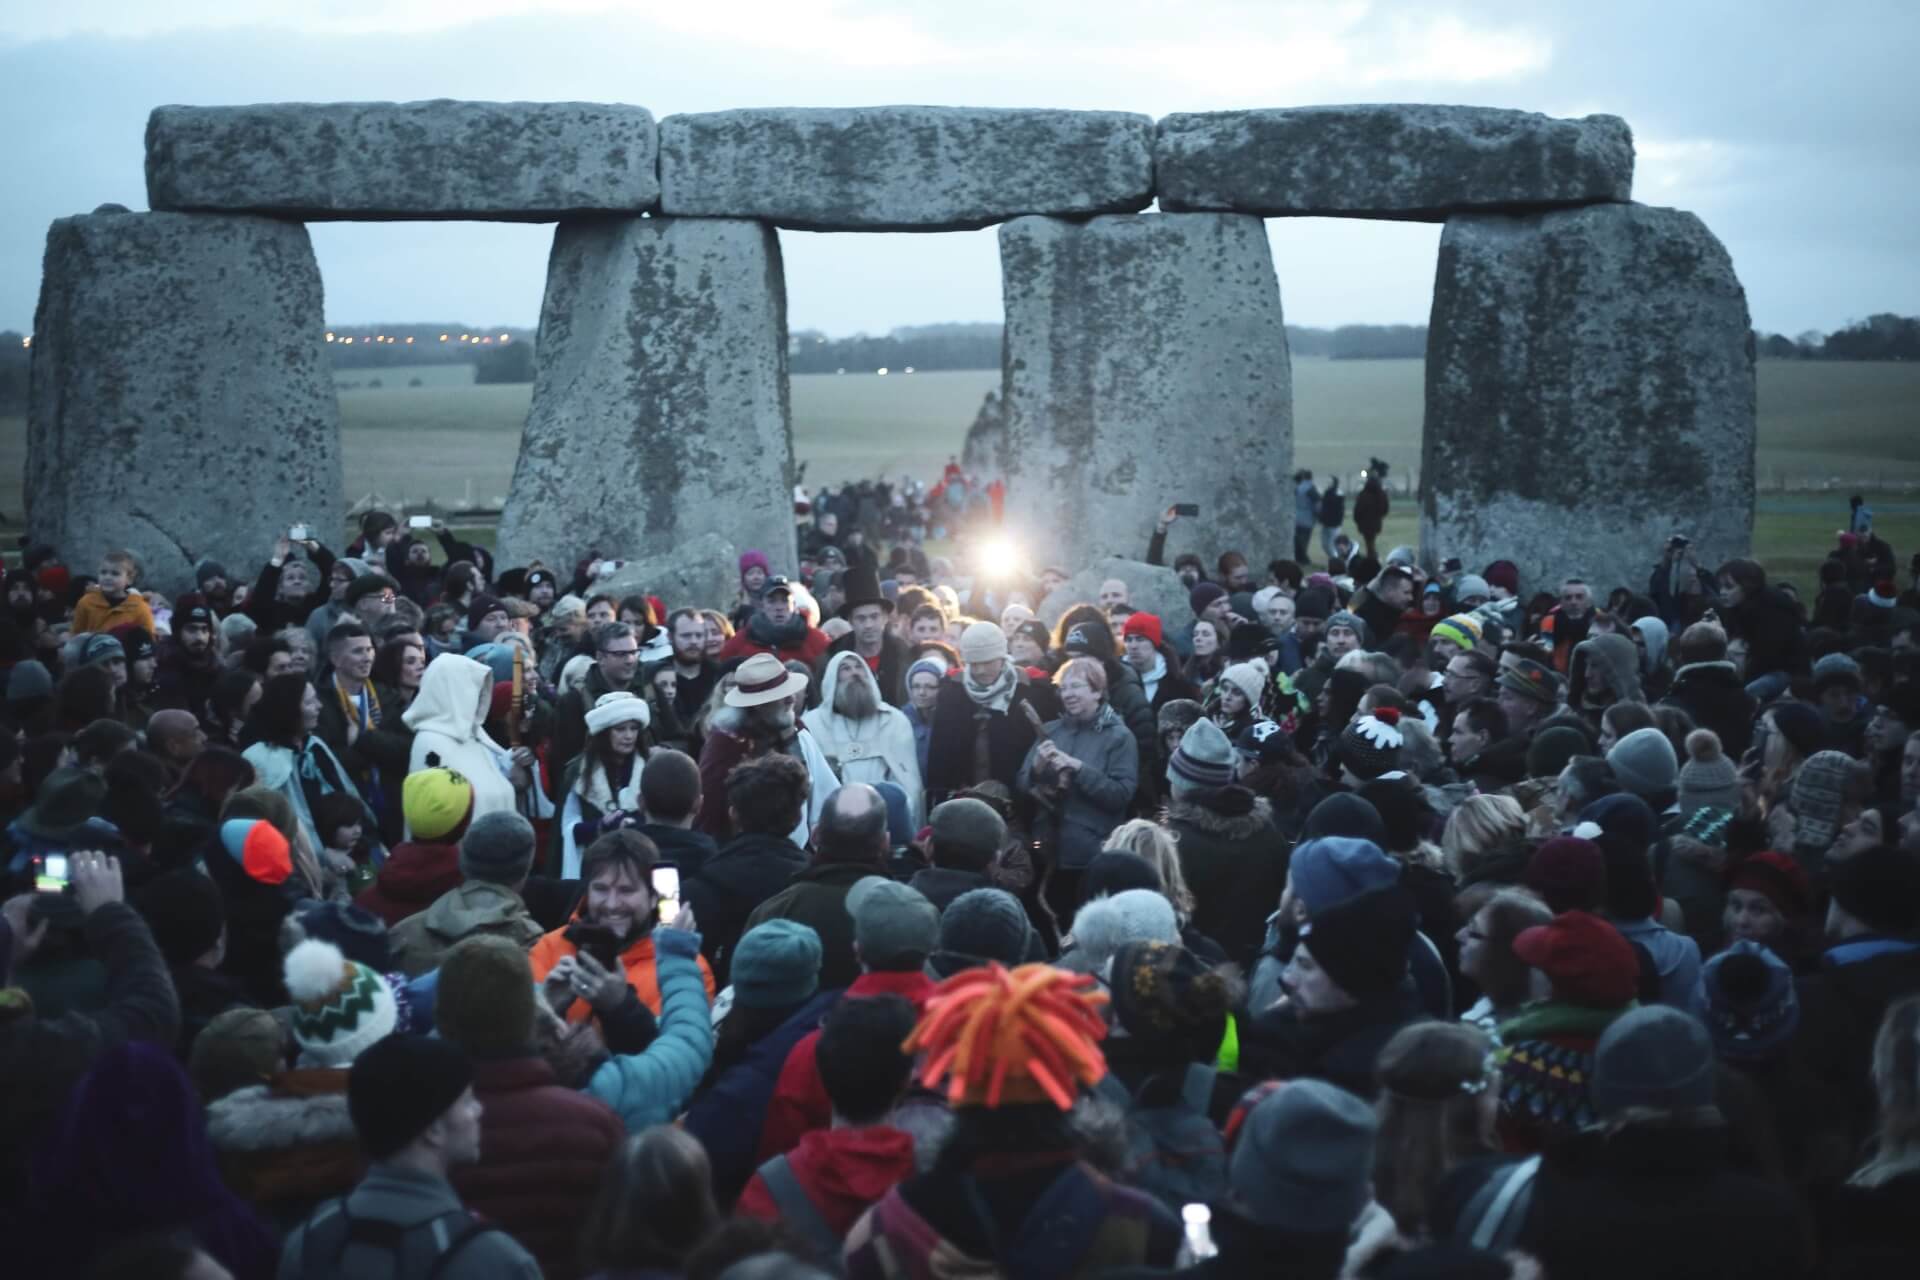 People gathered inside Stonehenge circle in the morning for Winter Solstic